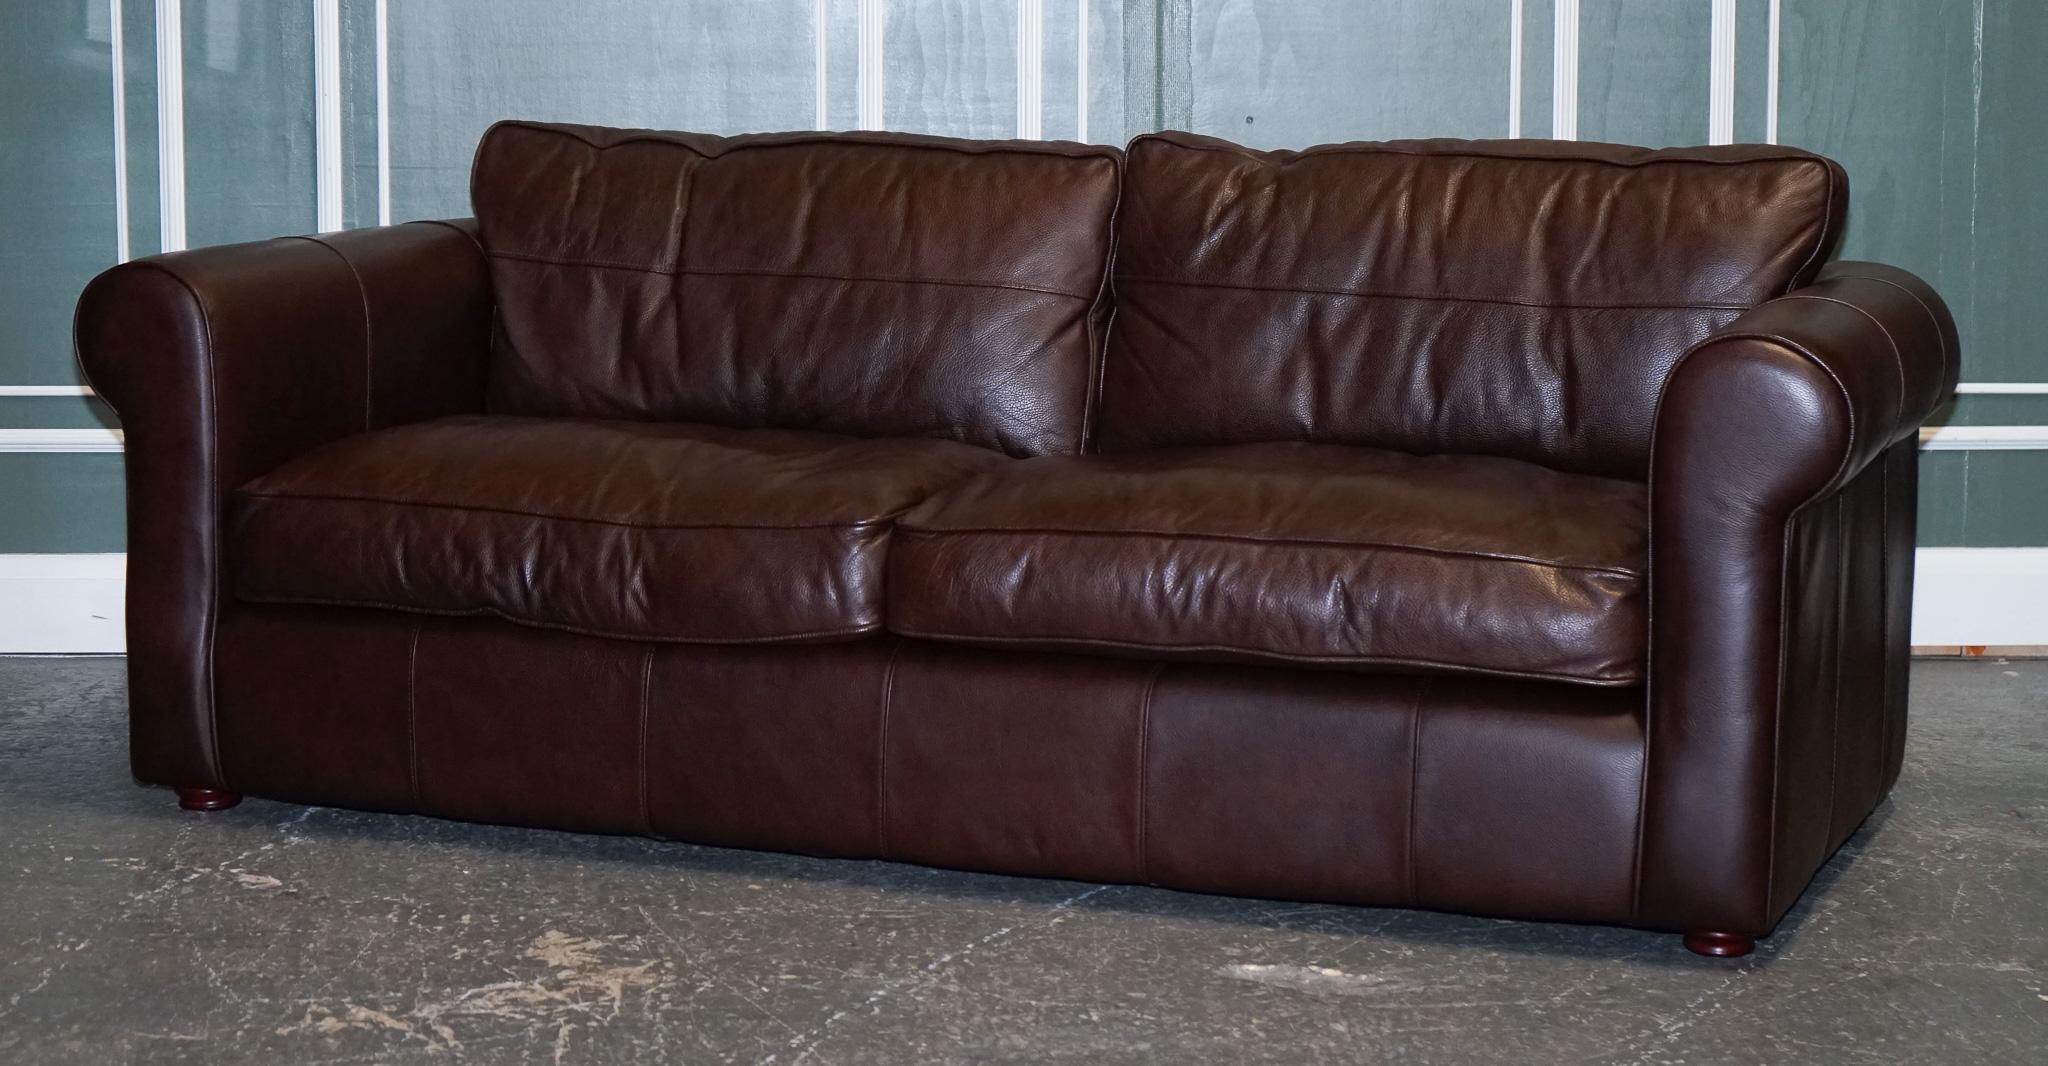 Hand-Crafted Stunning Thomas Lloyd Brown Leather Three Seater Sofa